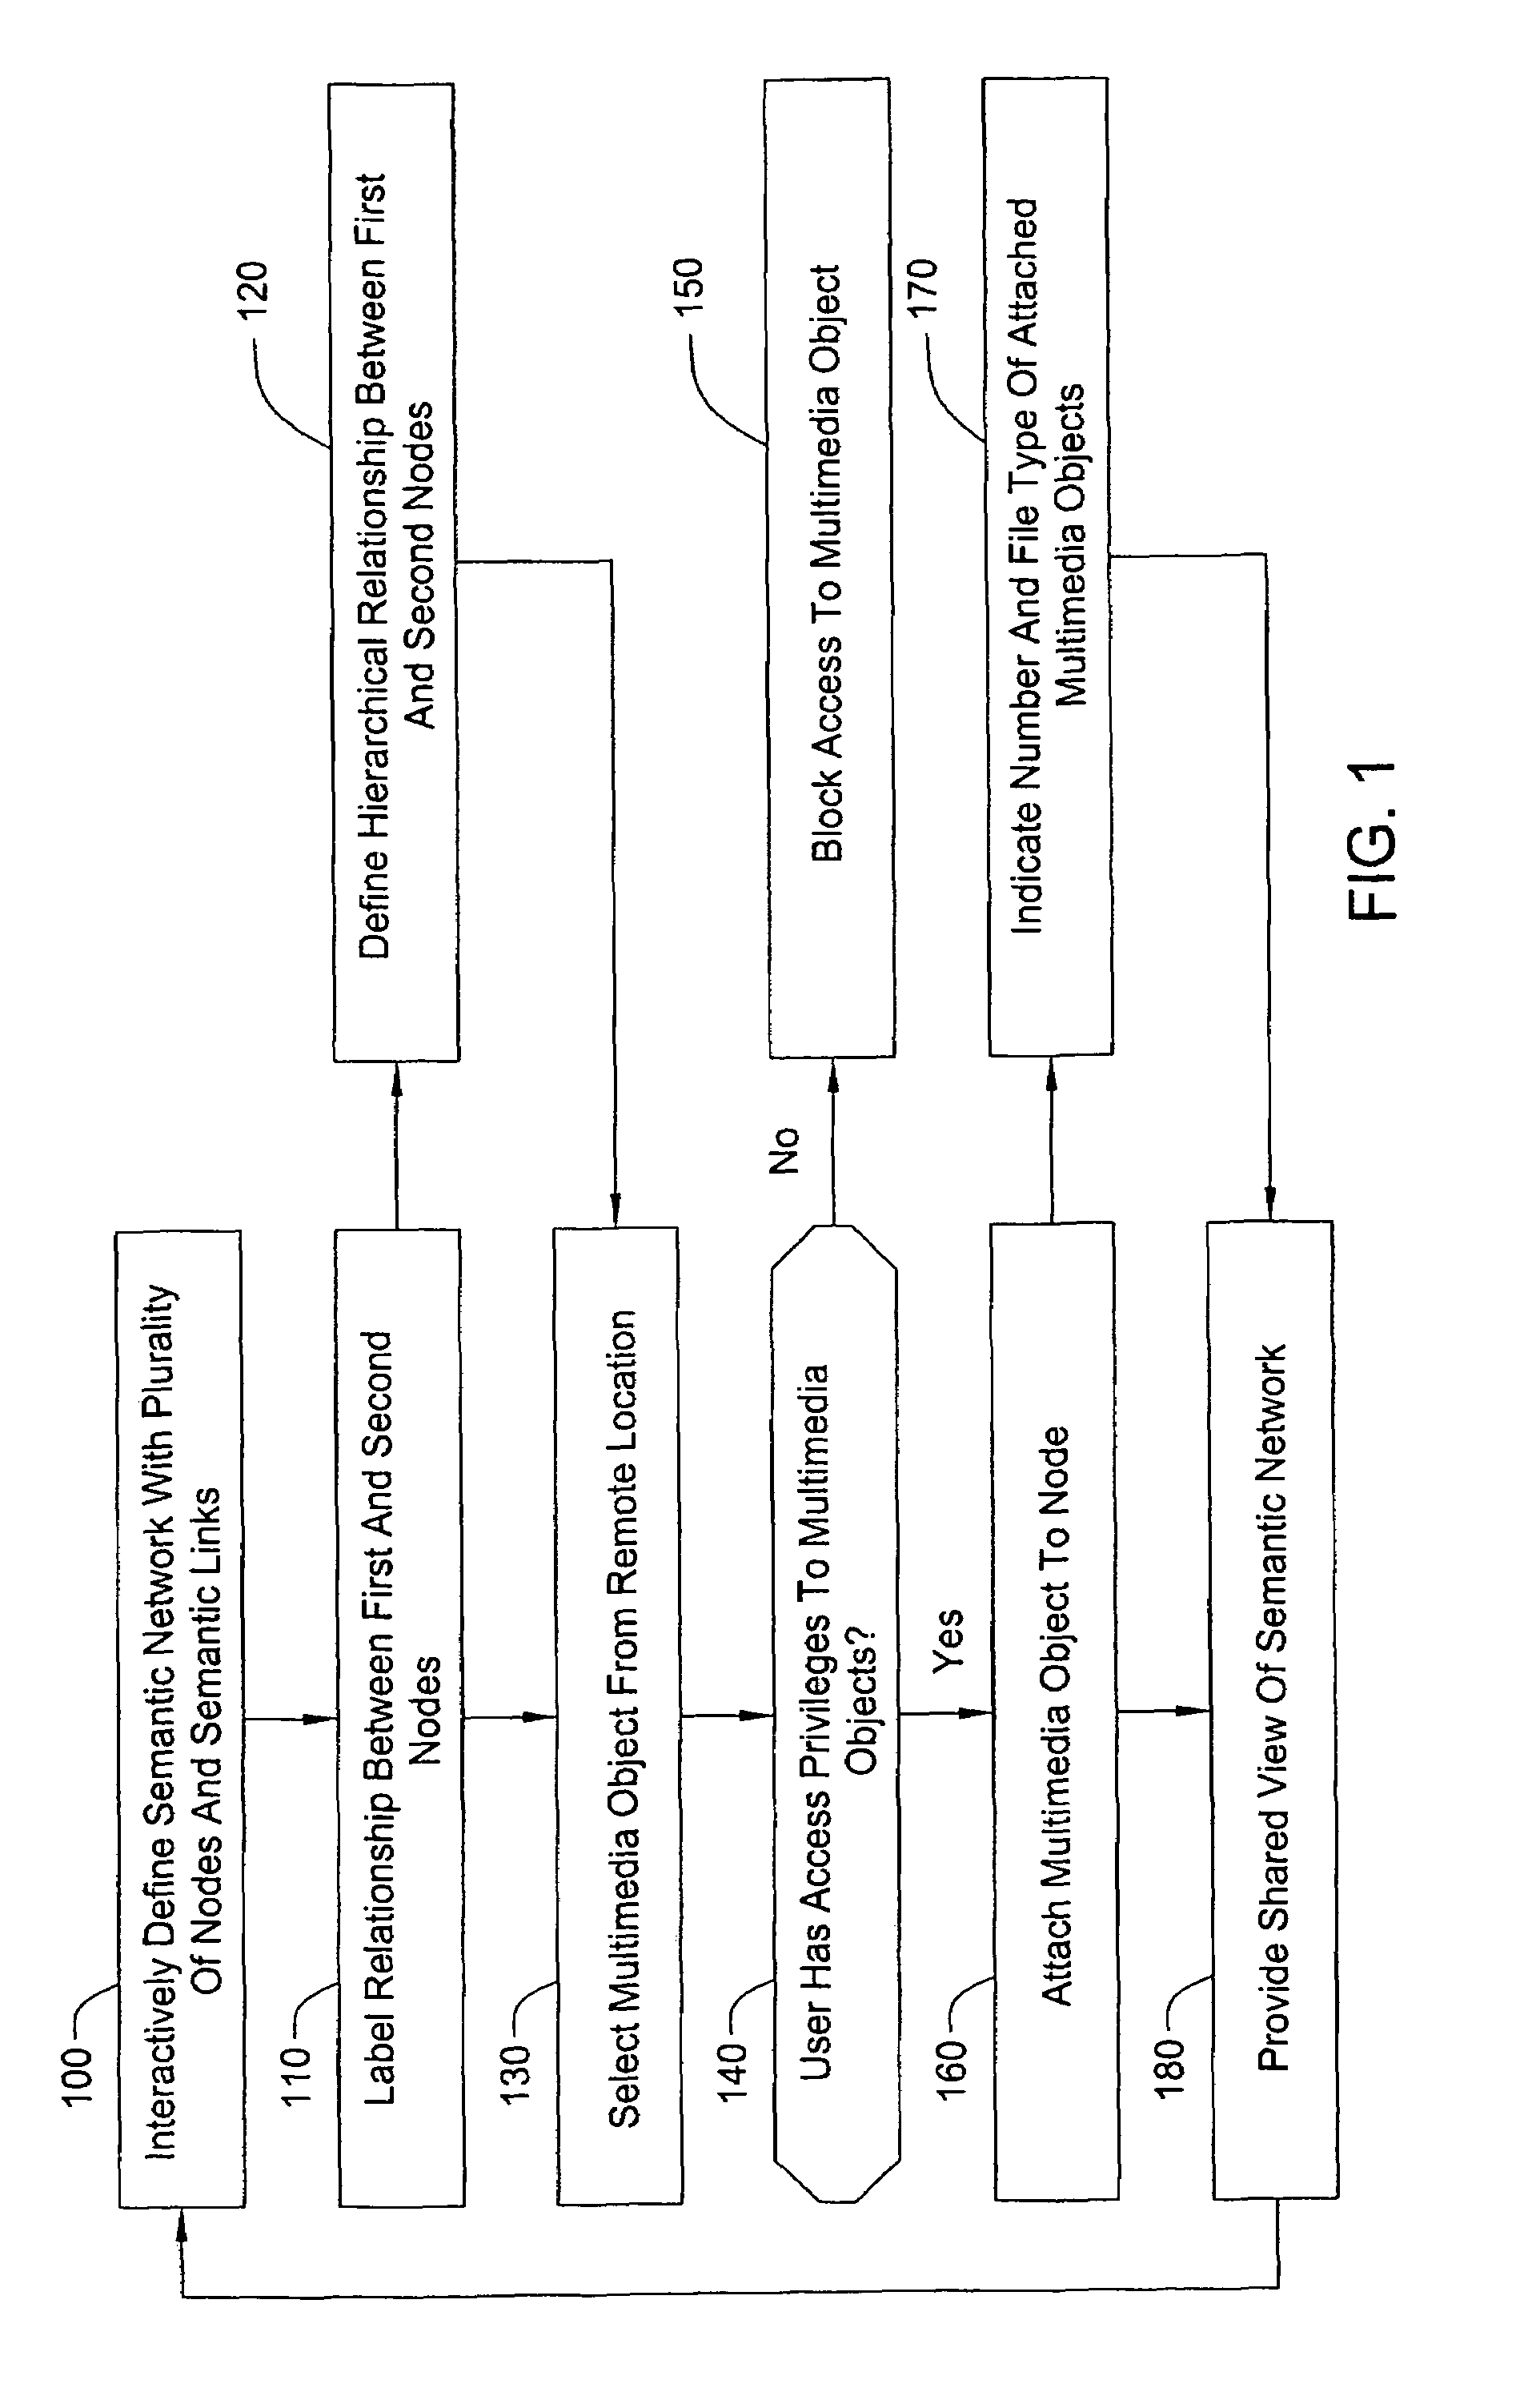 Methods and apparatus for storing, organizing, sharing and rating multimedia objects and documents